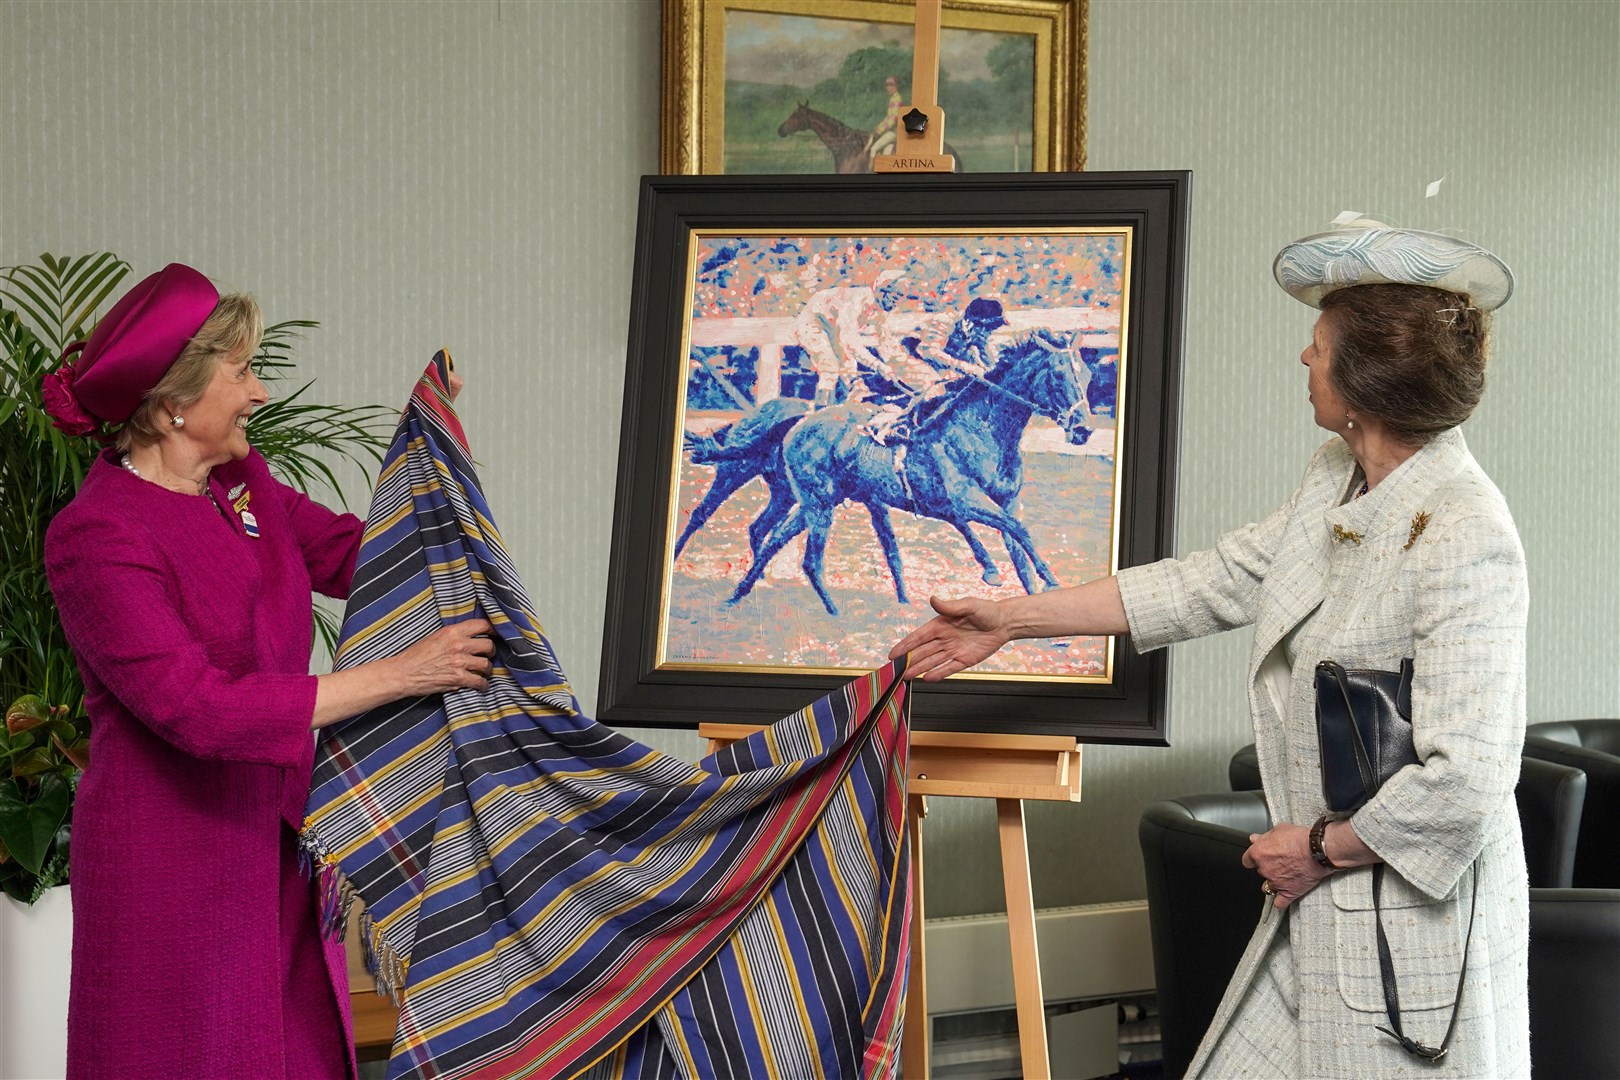 The Princess Royal receiving a gift to the Queen from Epsom Downs Racecourse presented by Julia Budd (Megan Ridgwell on behalf of The Jockey Club/PA)